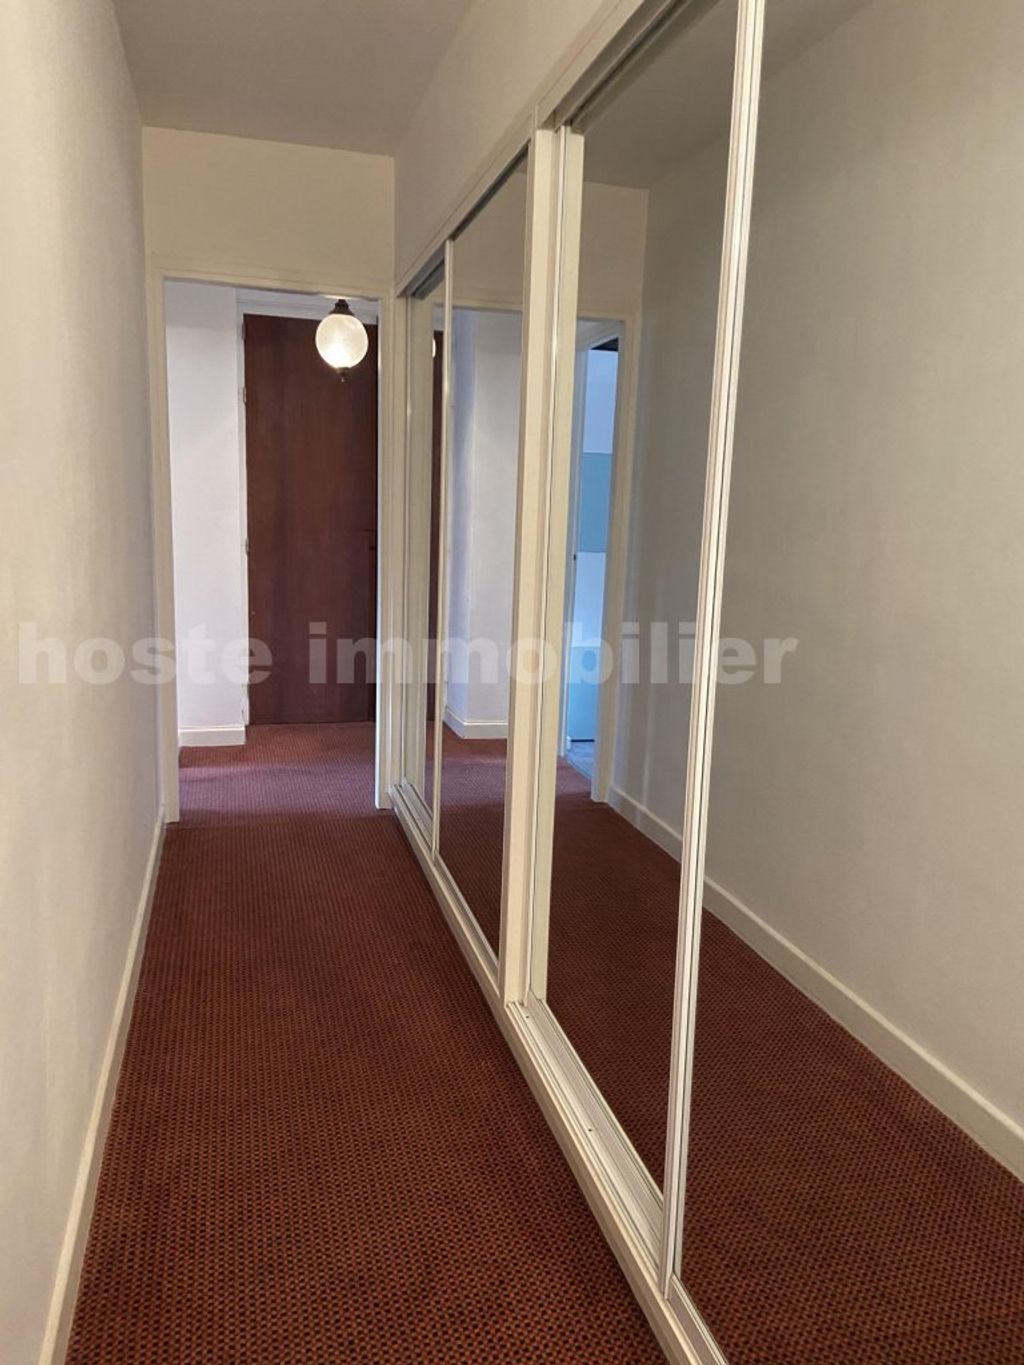 Achat appartement 4 pièce(s) Tourcoing